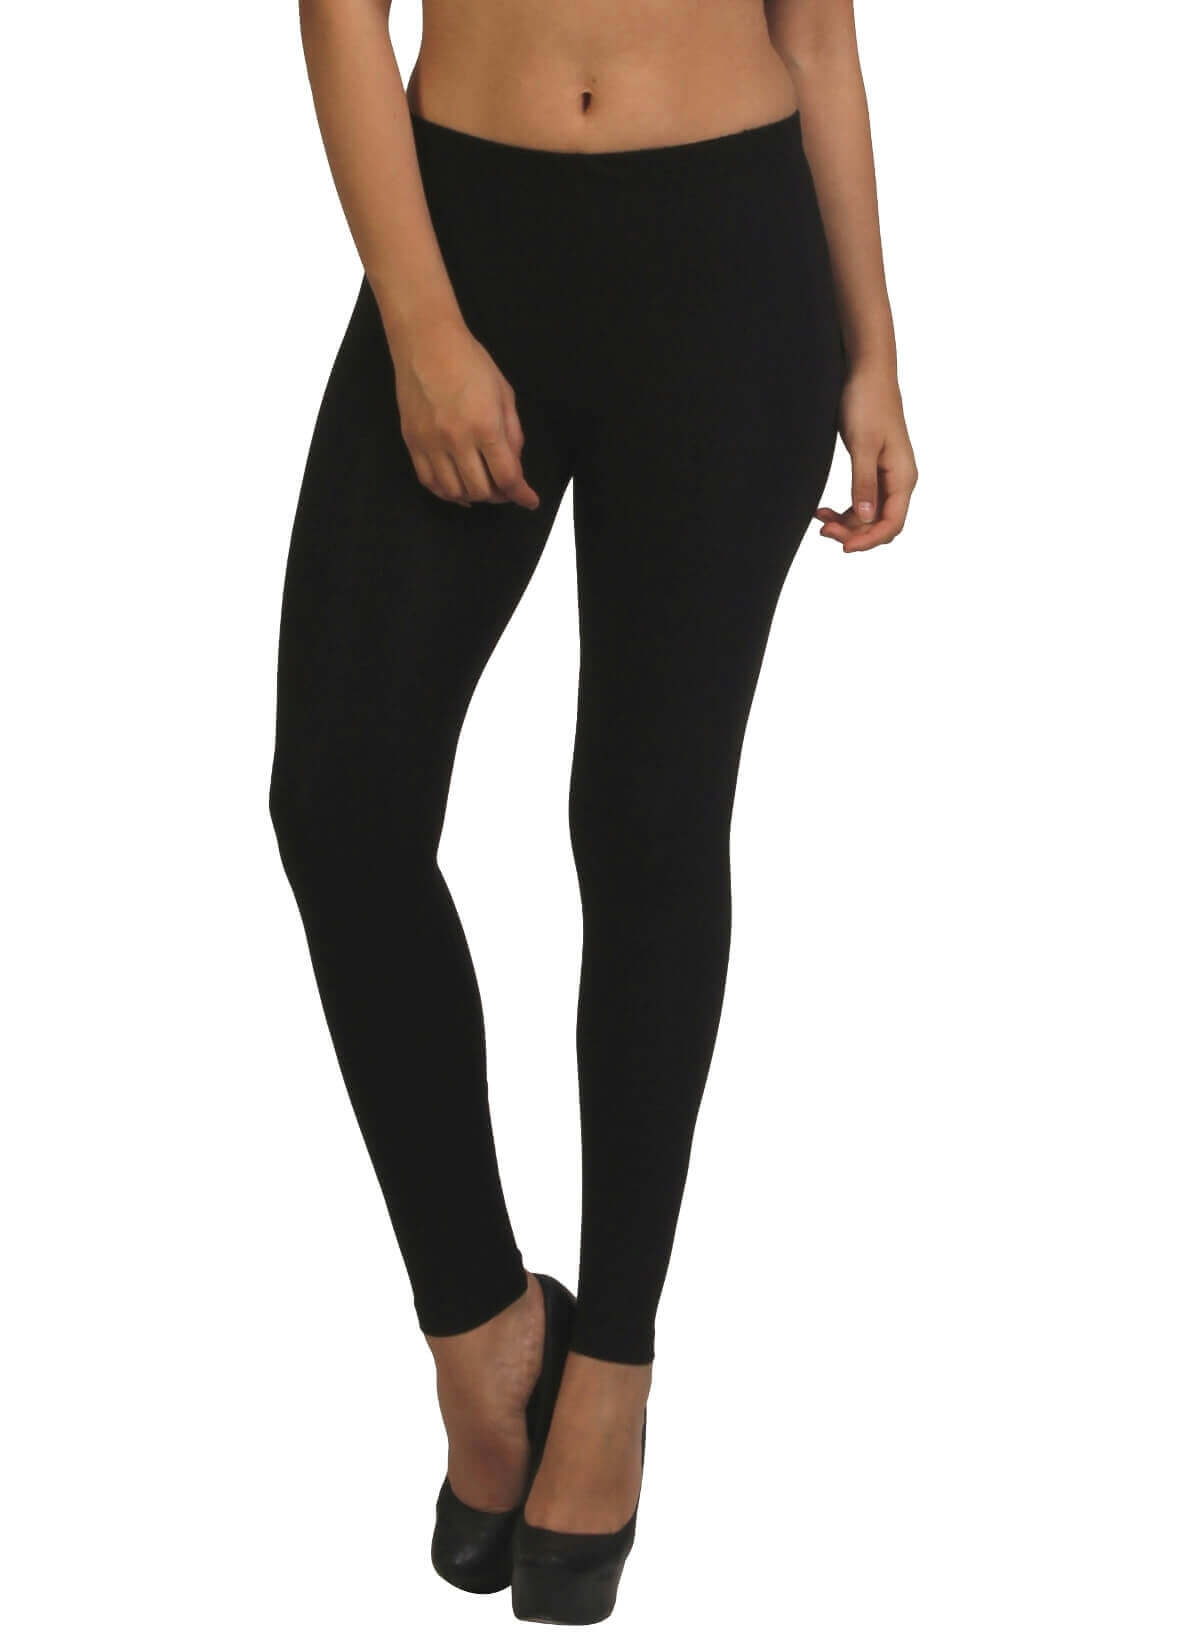 Buy Black Smooth Seamless Leggings Online | Top Quality – The ZigZag Stripe